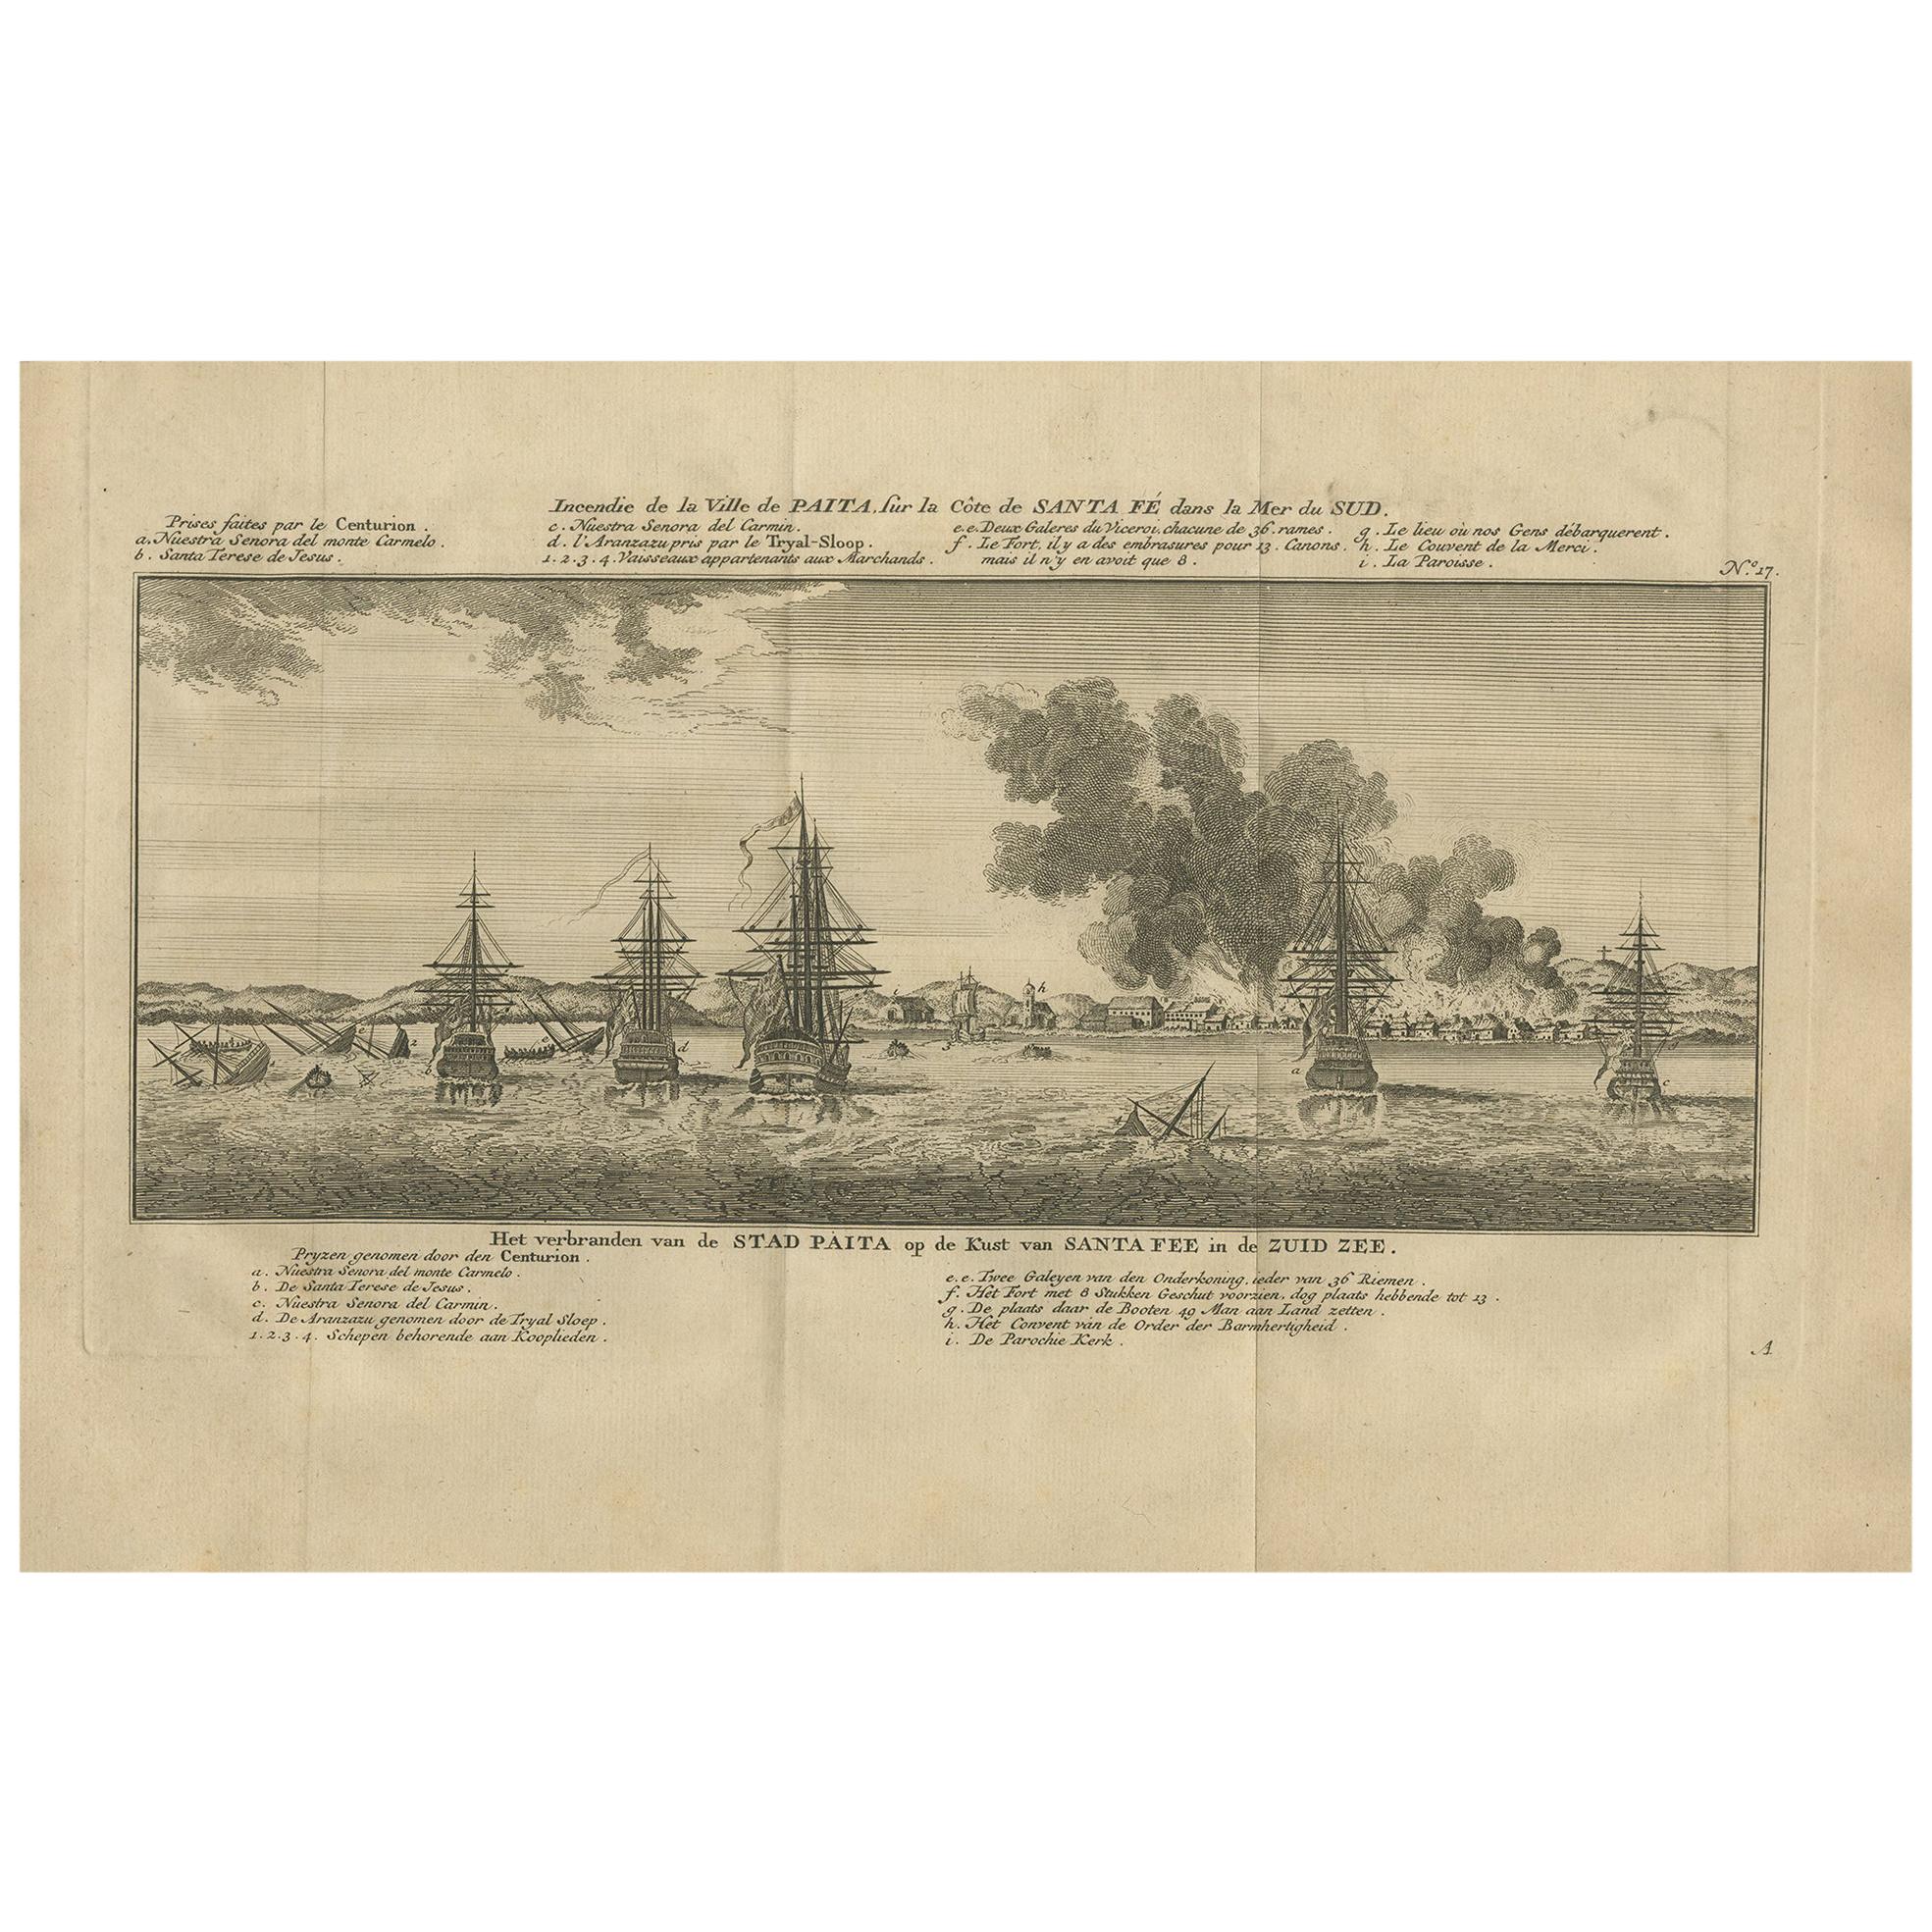 Antique Print of the City of Paita by Anson '1749'